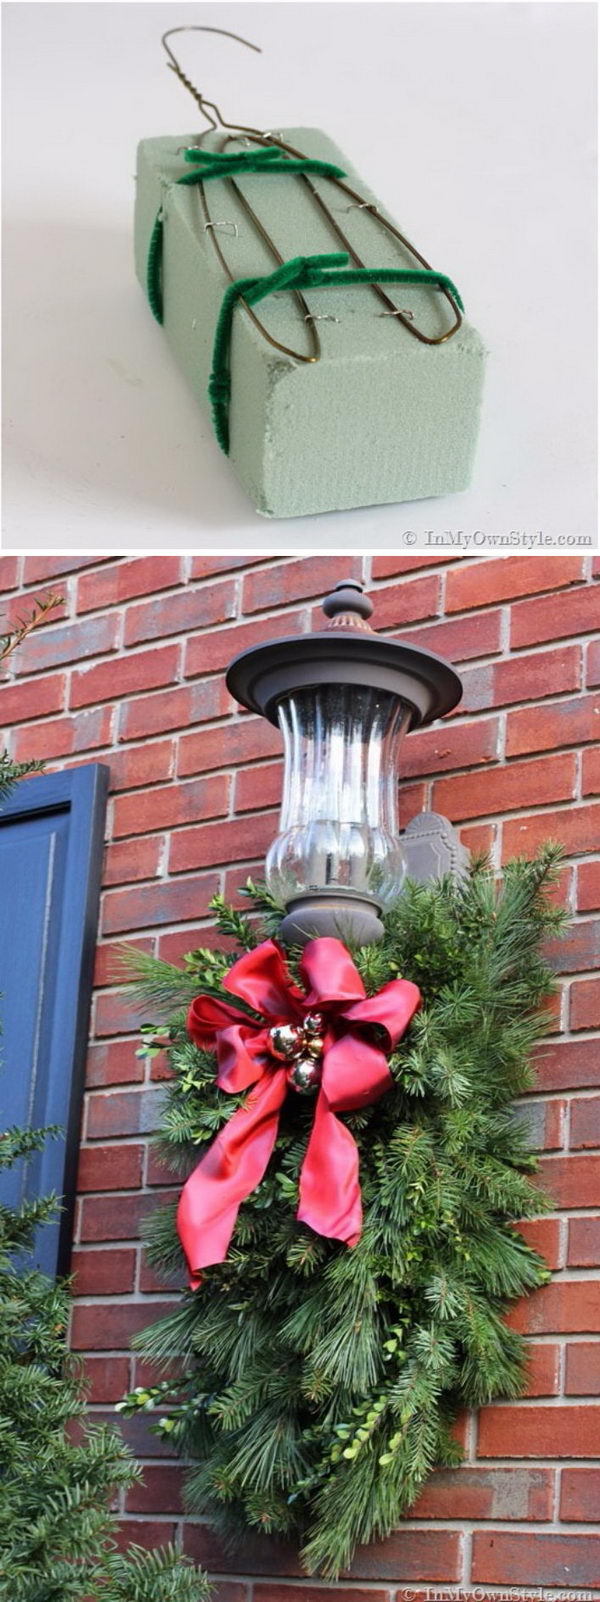 40+ Festive Outdoor Christmas Decorations